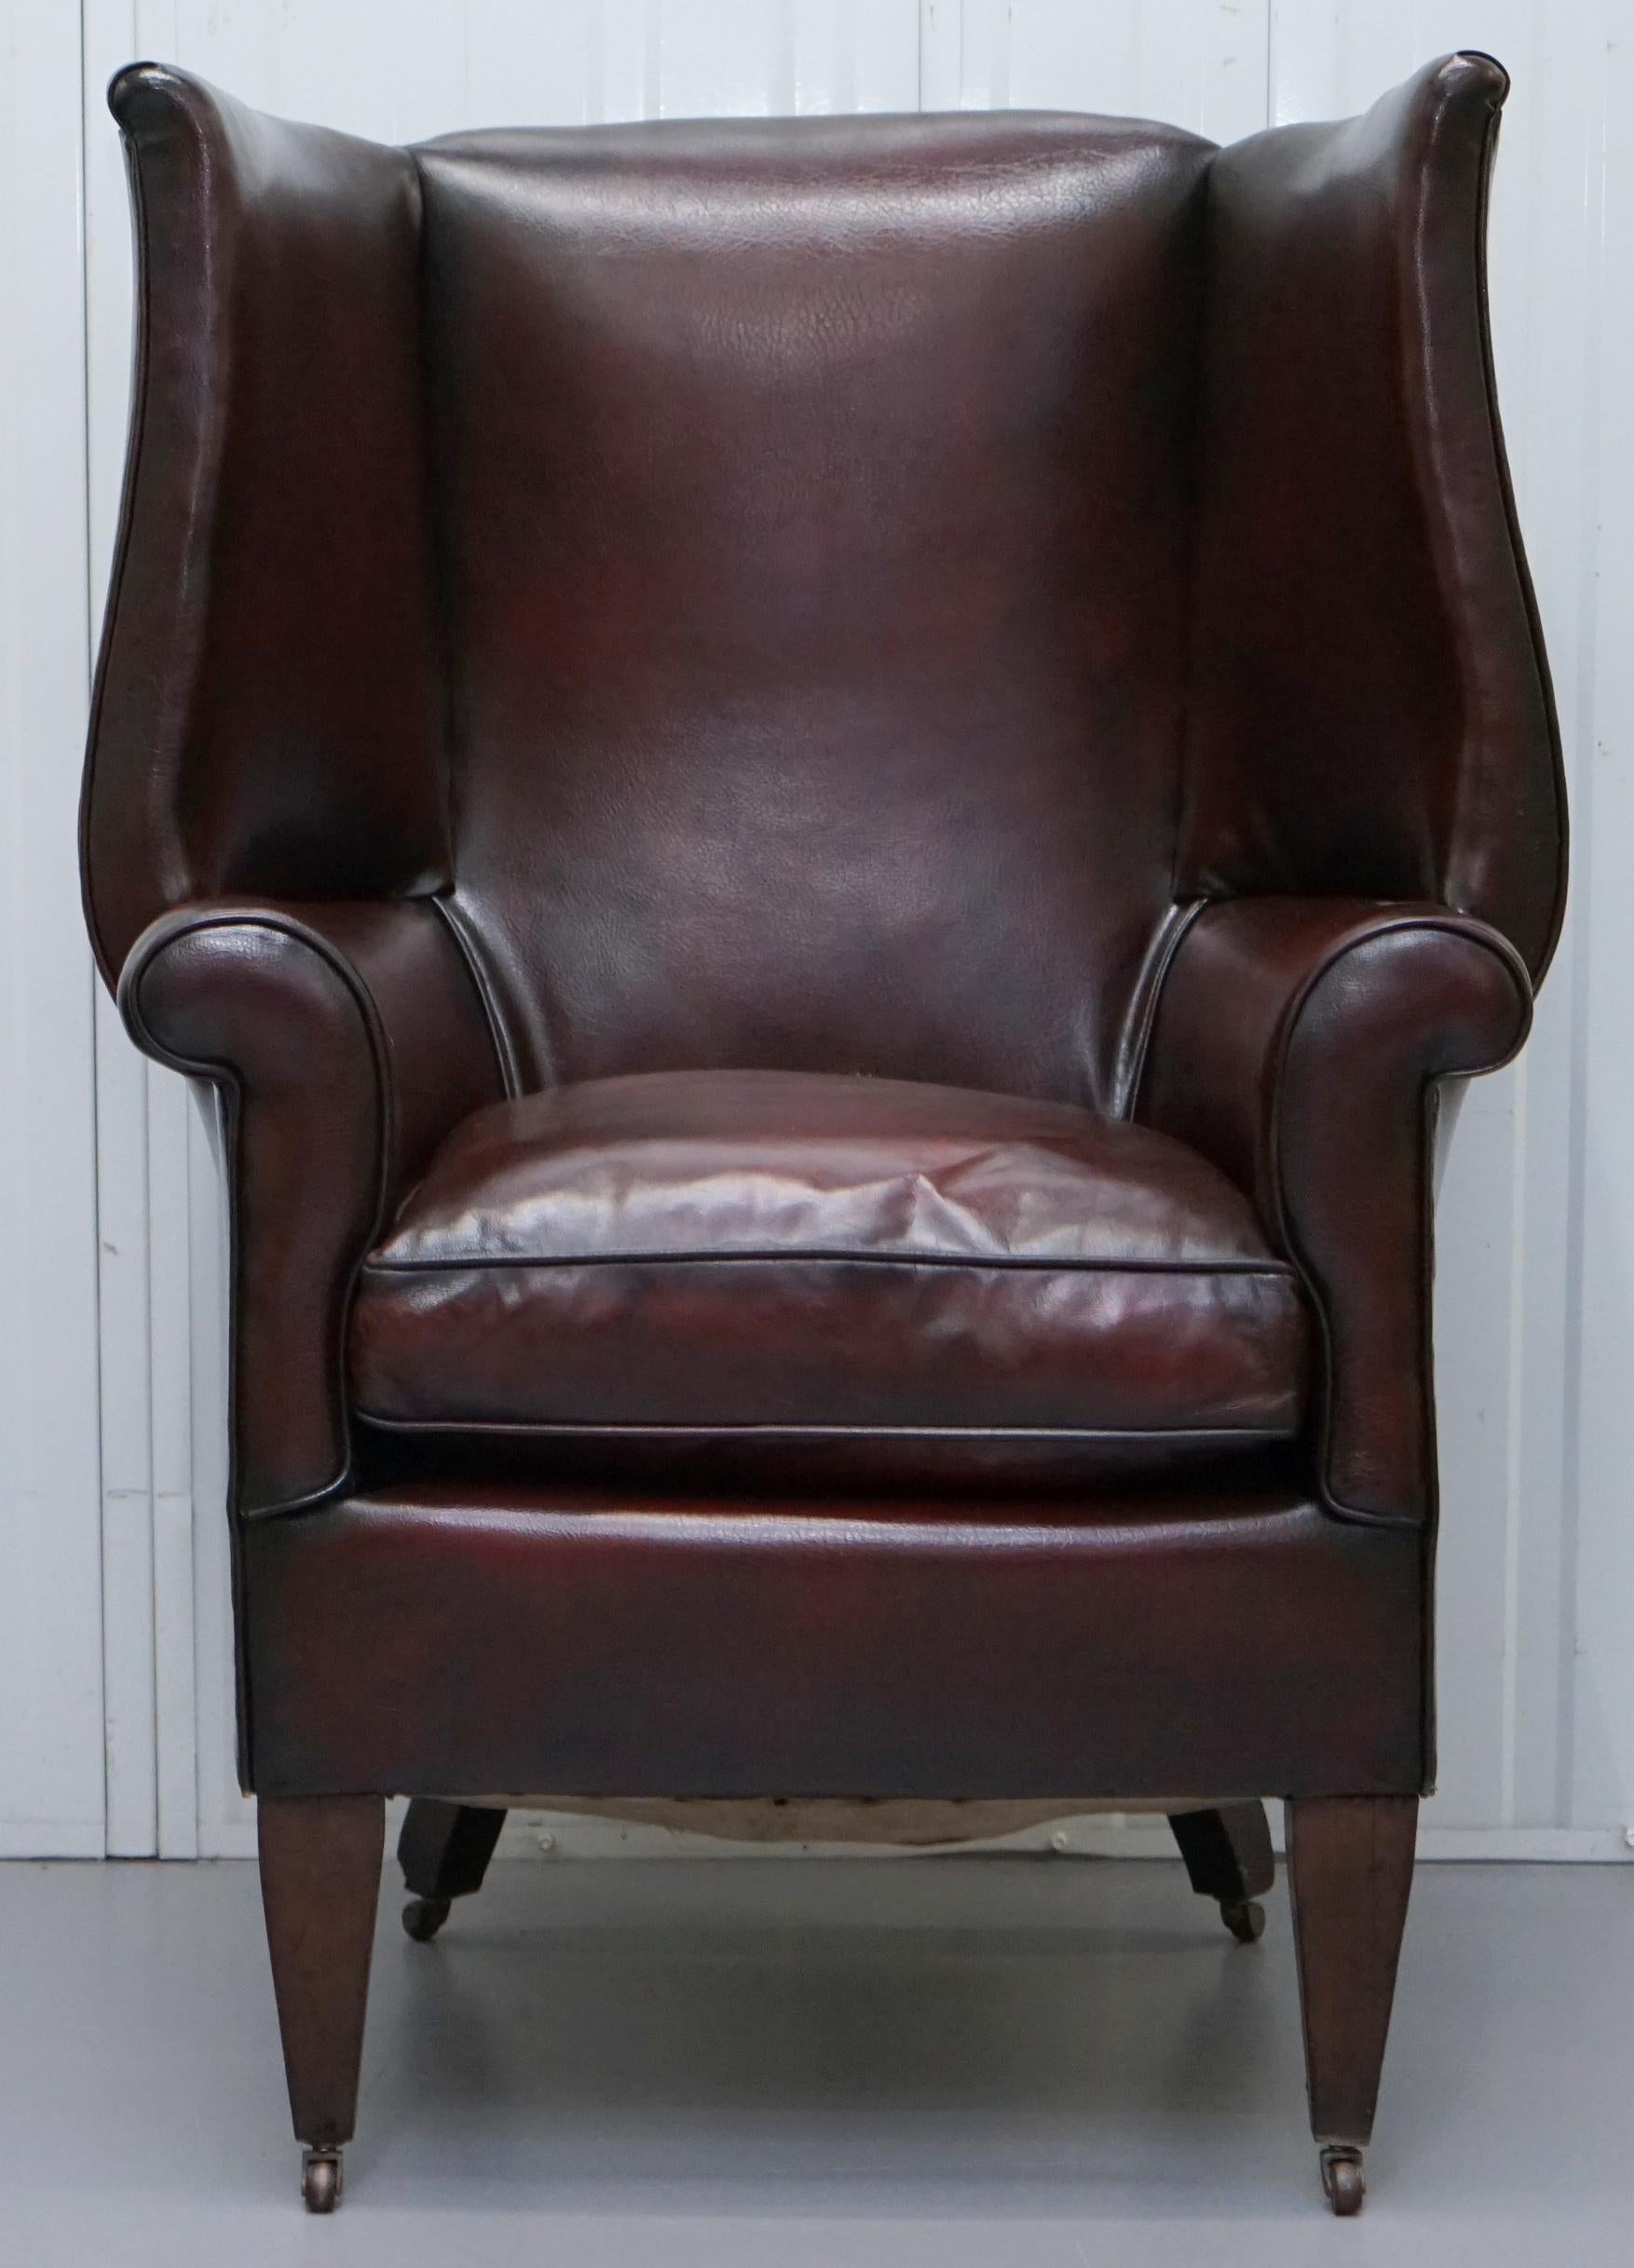 We are delighted to offer for sale this stunning fully restored dark reddish brown hand dyed leather Victorian Porters armchair

A very good looking and nicely refurbished piece, this is an original Victorian circa 1860 armchair, it has a new